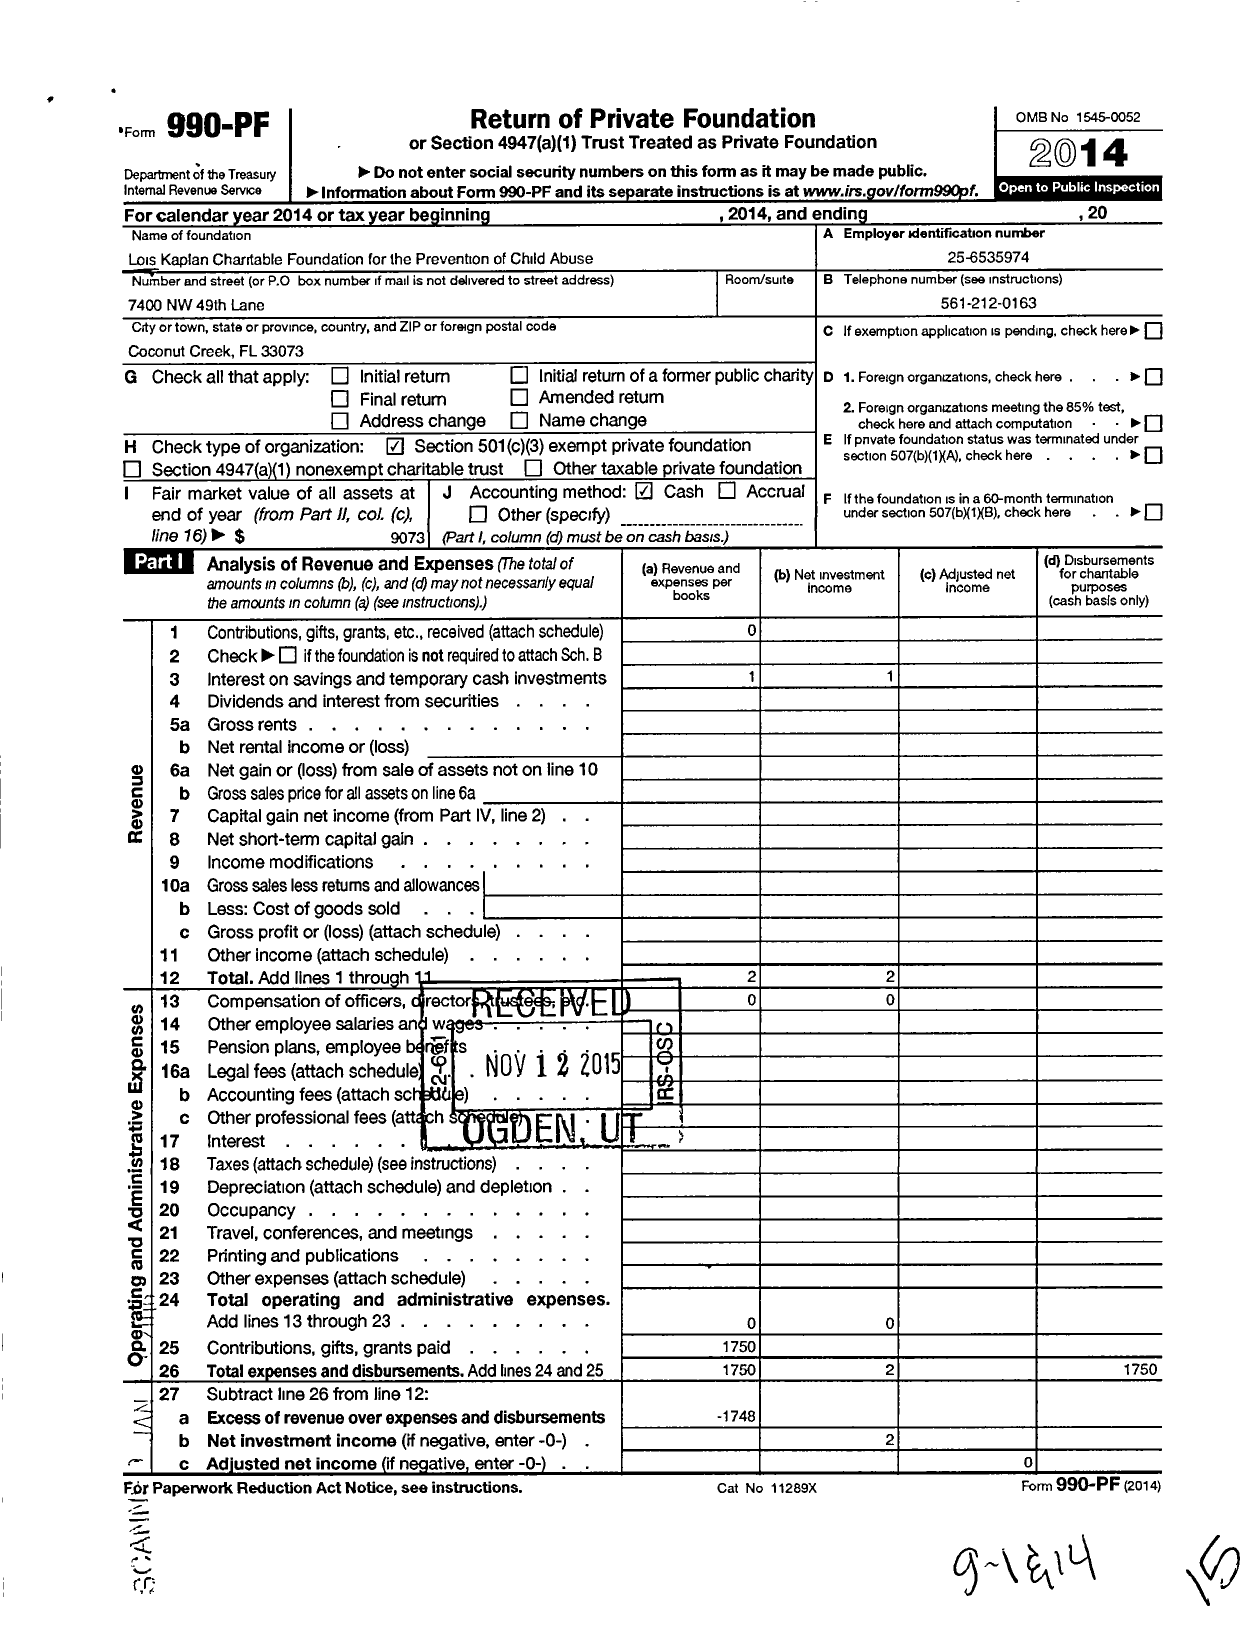 Image of first page of 2014 Form 990PF for Lois Kaplan Charitable Foundation for the Prevention of Child Ab